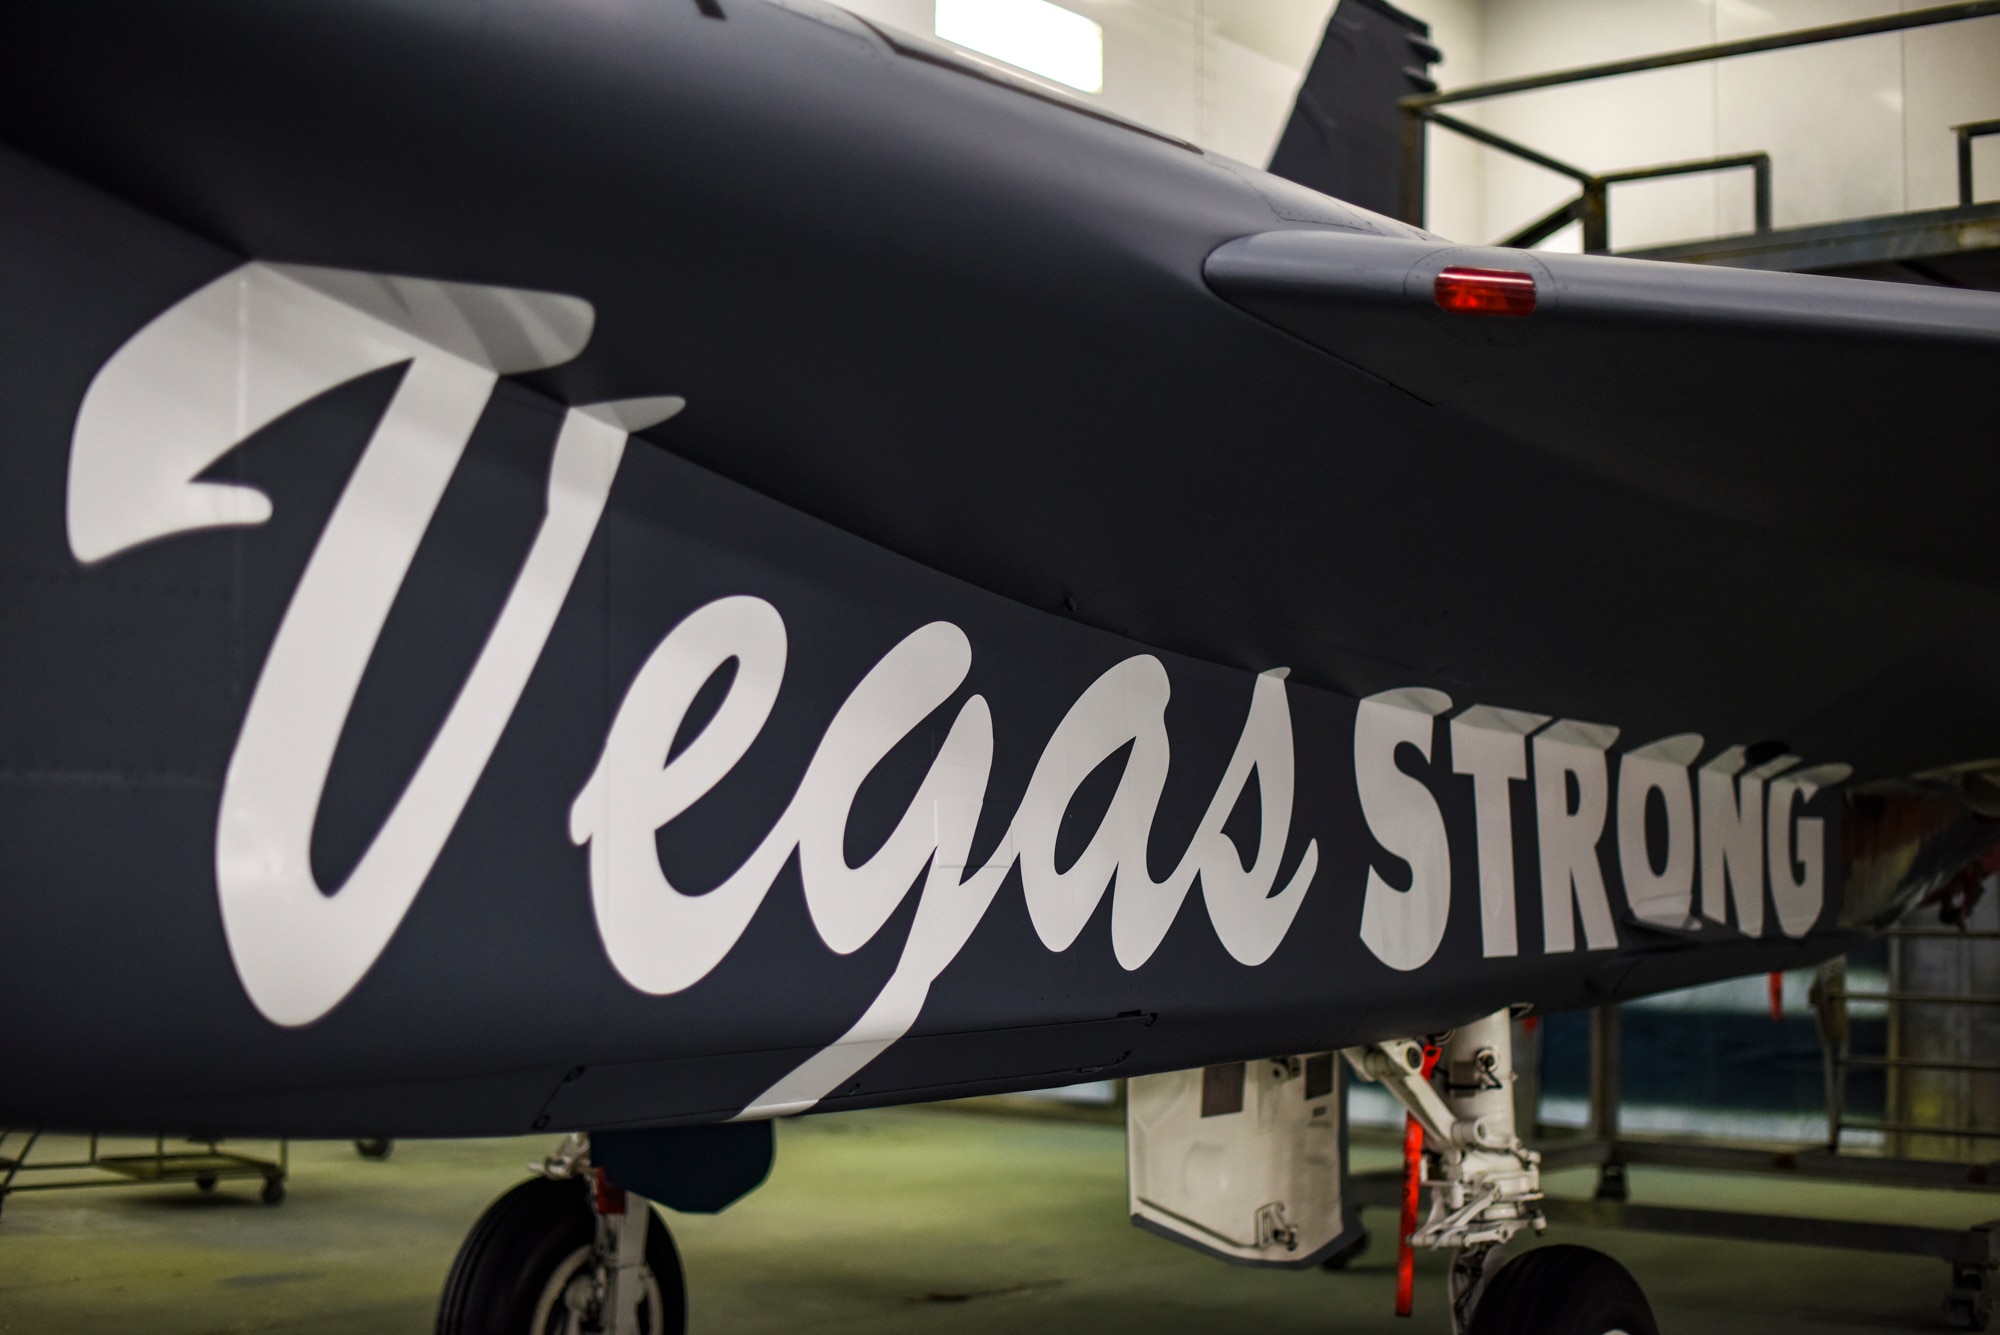 An F-15C Eagle bears the term Vegas Strong at Nellis Air Force Base, Nevada, Nov. 1, 2017. The aircraft was repainted to promote the unity between the Las Vegas community and Nellis AFB. (U.S. Air Force photo by Airman 1st Class Andrew D. Sarver/Released)